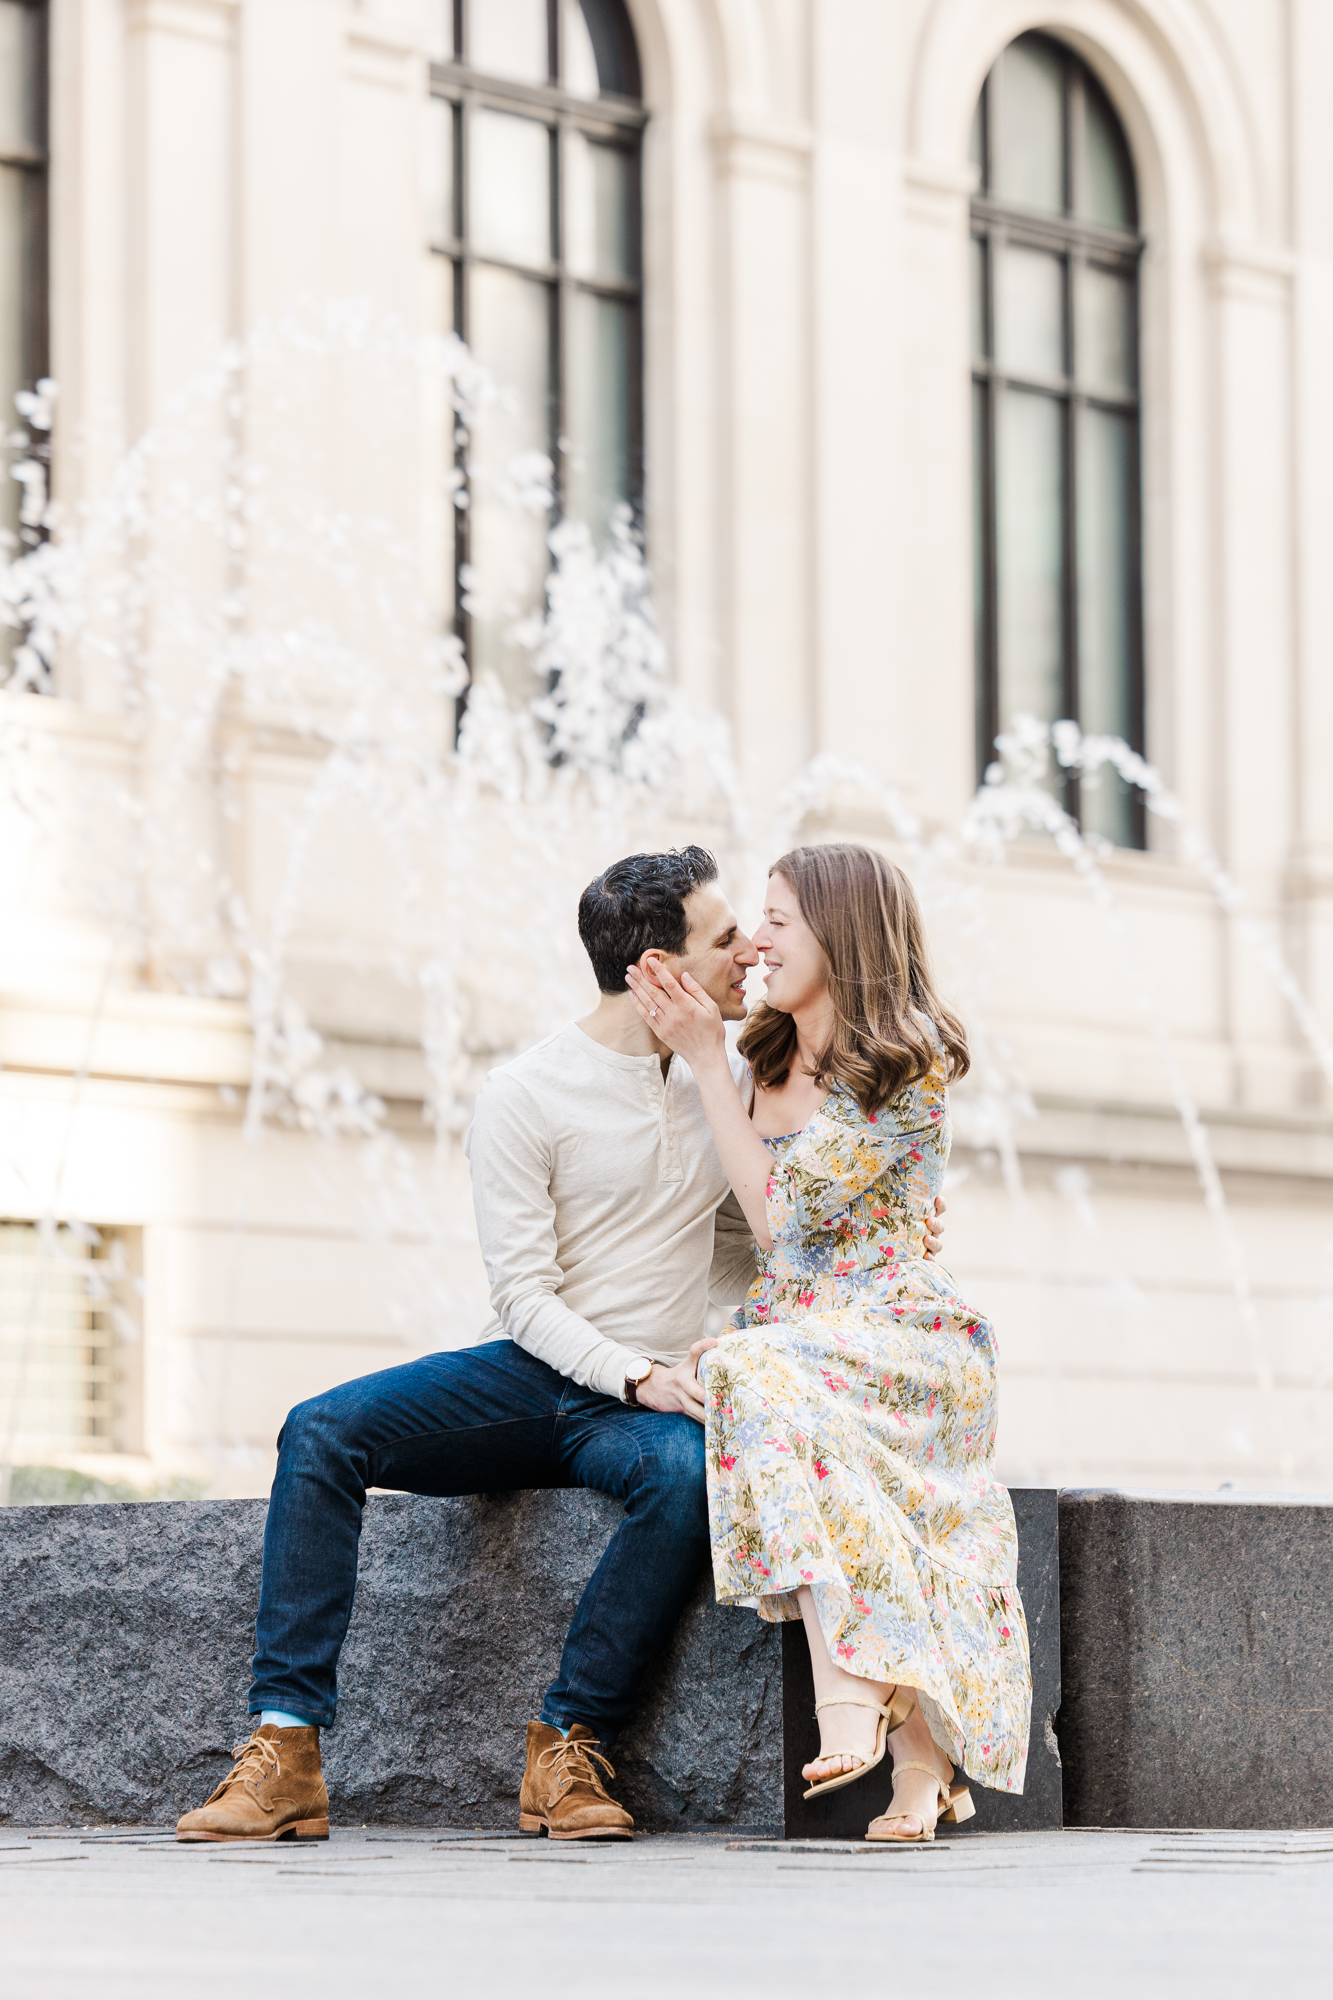 Awesome Engagement Photos in New York